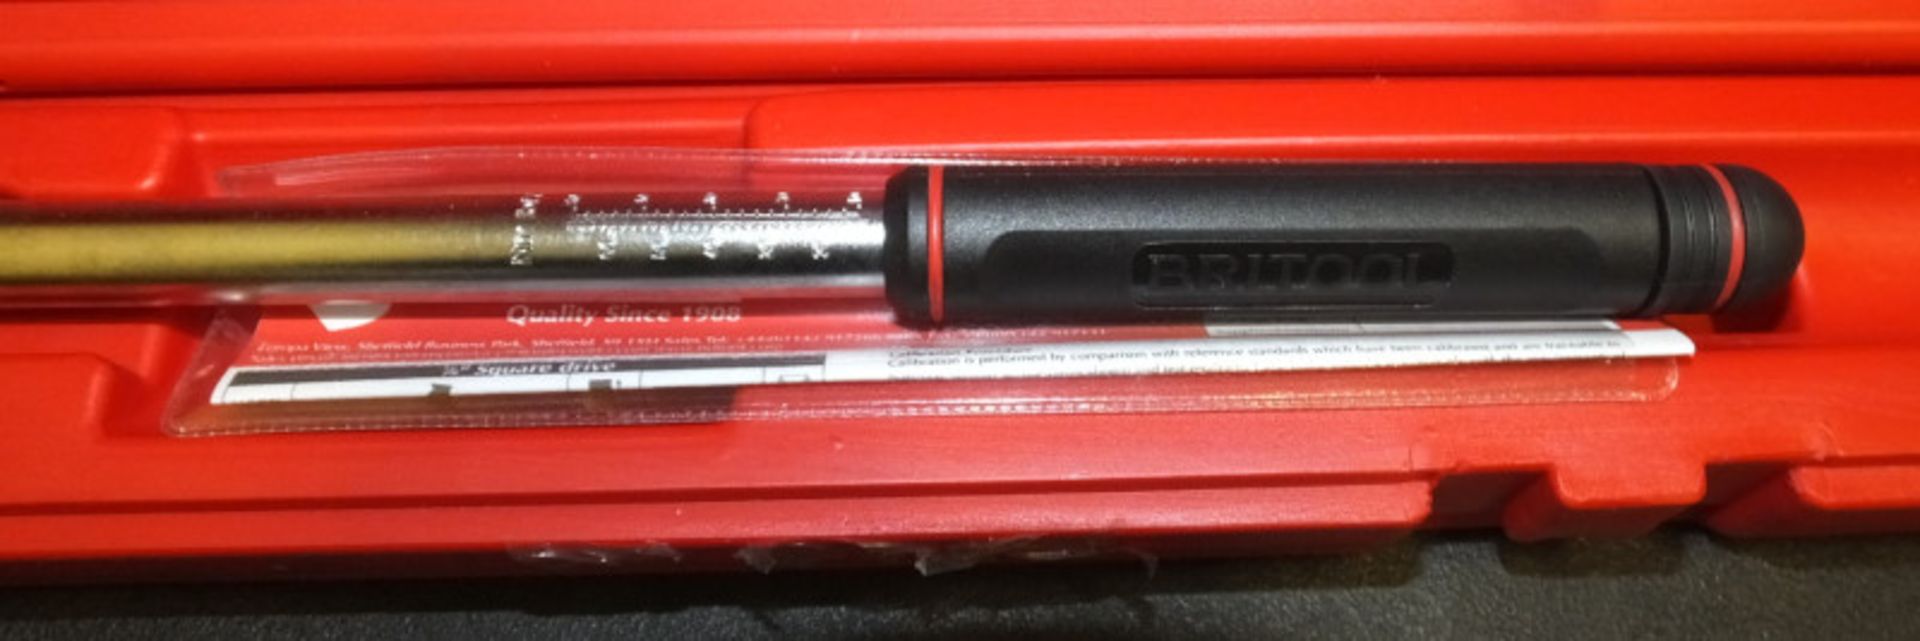 Britool EVT 600A Torque Wrench 12-68Nm with case - Image 3 of 6